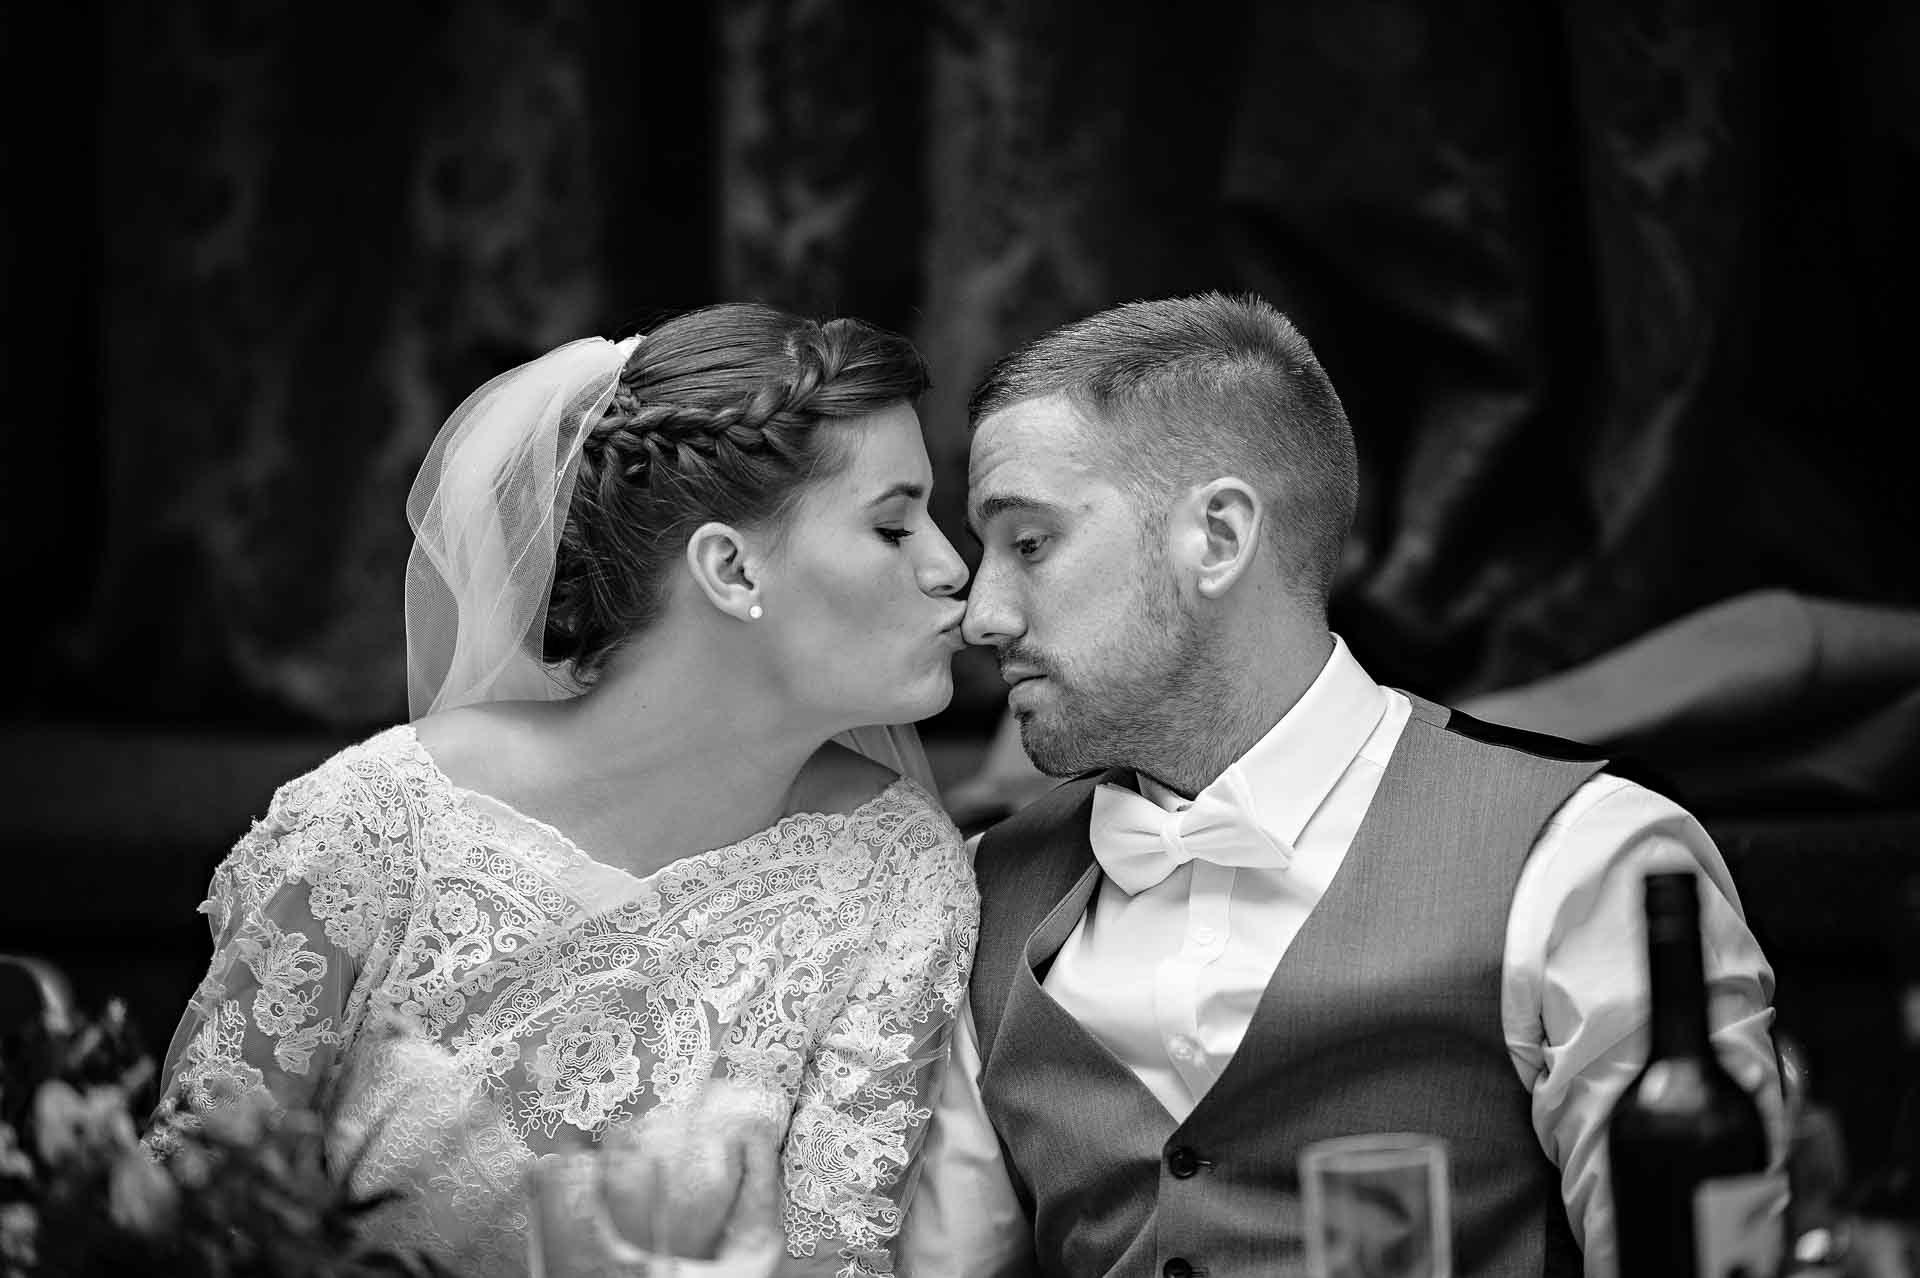 Bride kisses serious groom on the nose at wedding reception